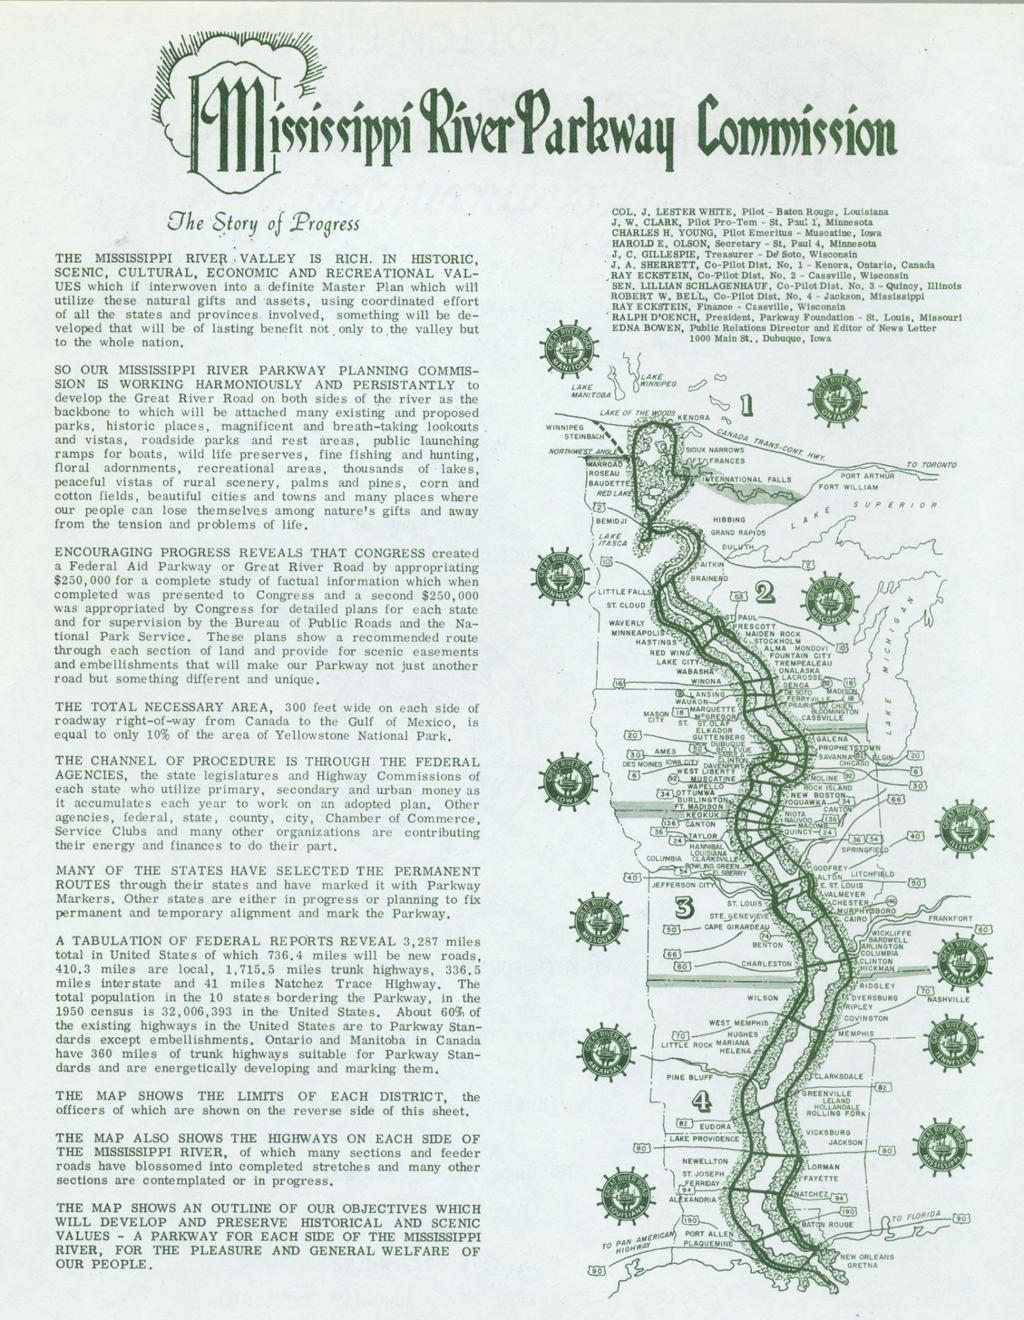 1963 Mississippi River Parkway Commission Story of Progress The 2018 Corridor Management Plan carries forward the